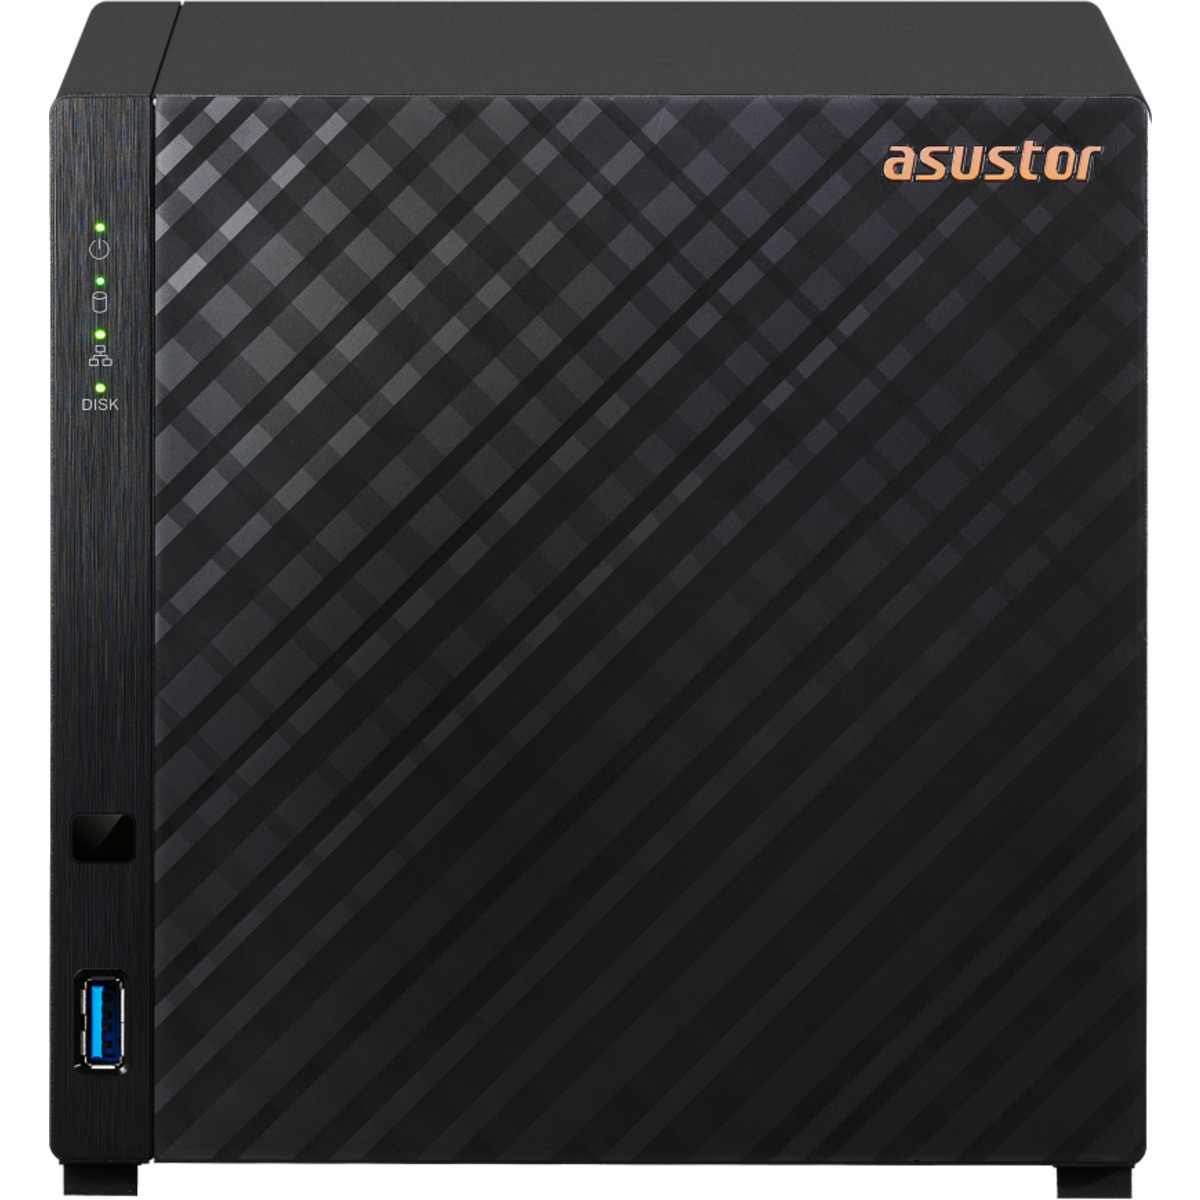 buy ASUSTOR DRIVESTOR 4 AS1104T 64tb Desktop NAS - Network Attached Storage Device 4x16000gb Seagate EXOS X18 ST16000NM000J 3.5 7200rpm SATA 6Gb/s HDD ENTERPRISE Class Drives Installed - Burn-In Tested - nas headquarters buy network attached storage server device das new raid-5 free shipping usa spring sale DRIVESTOR 4 AS1104T